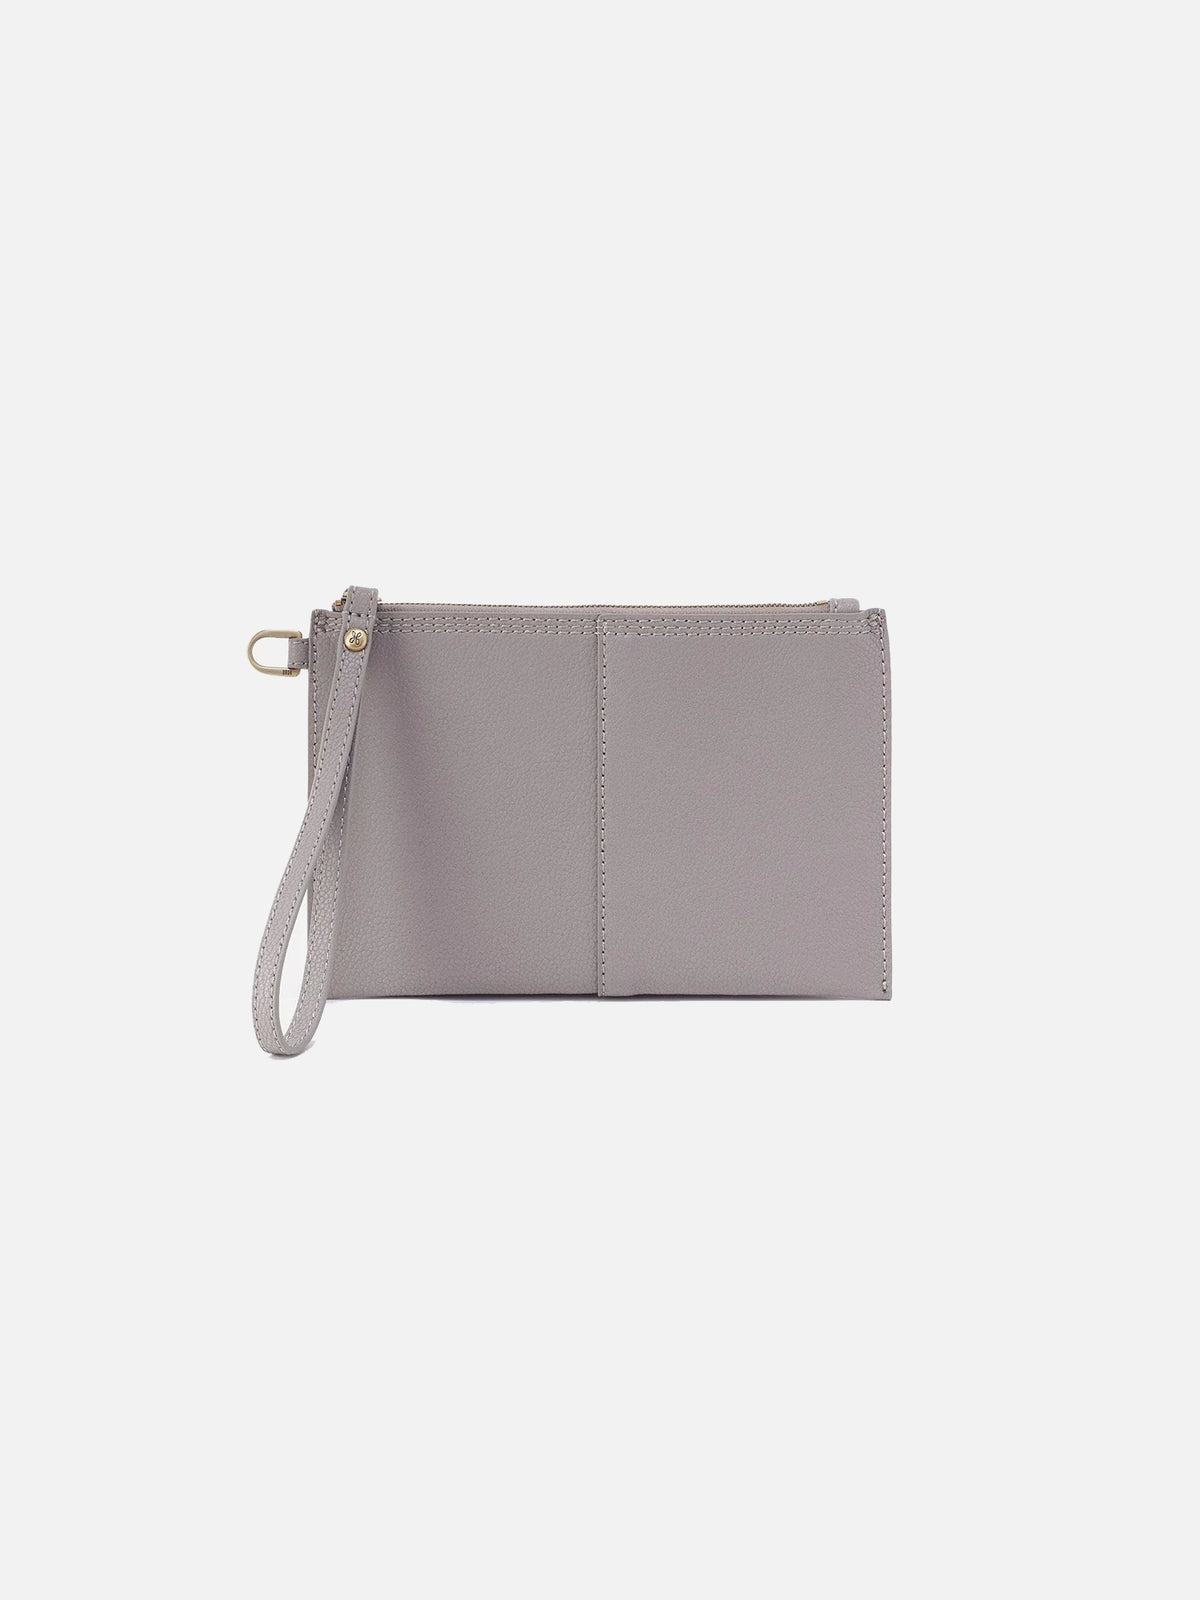 hobo vida small pouch in morning dove grey micro pebbled leather